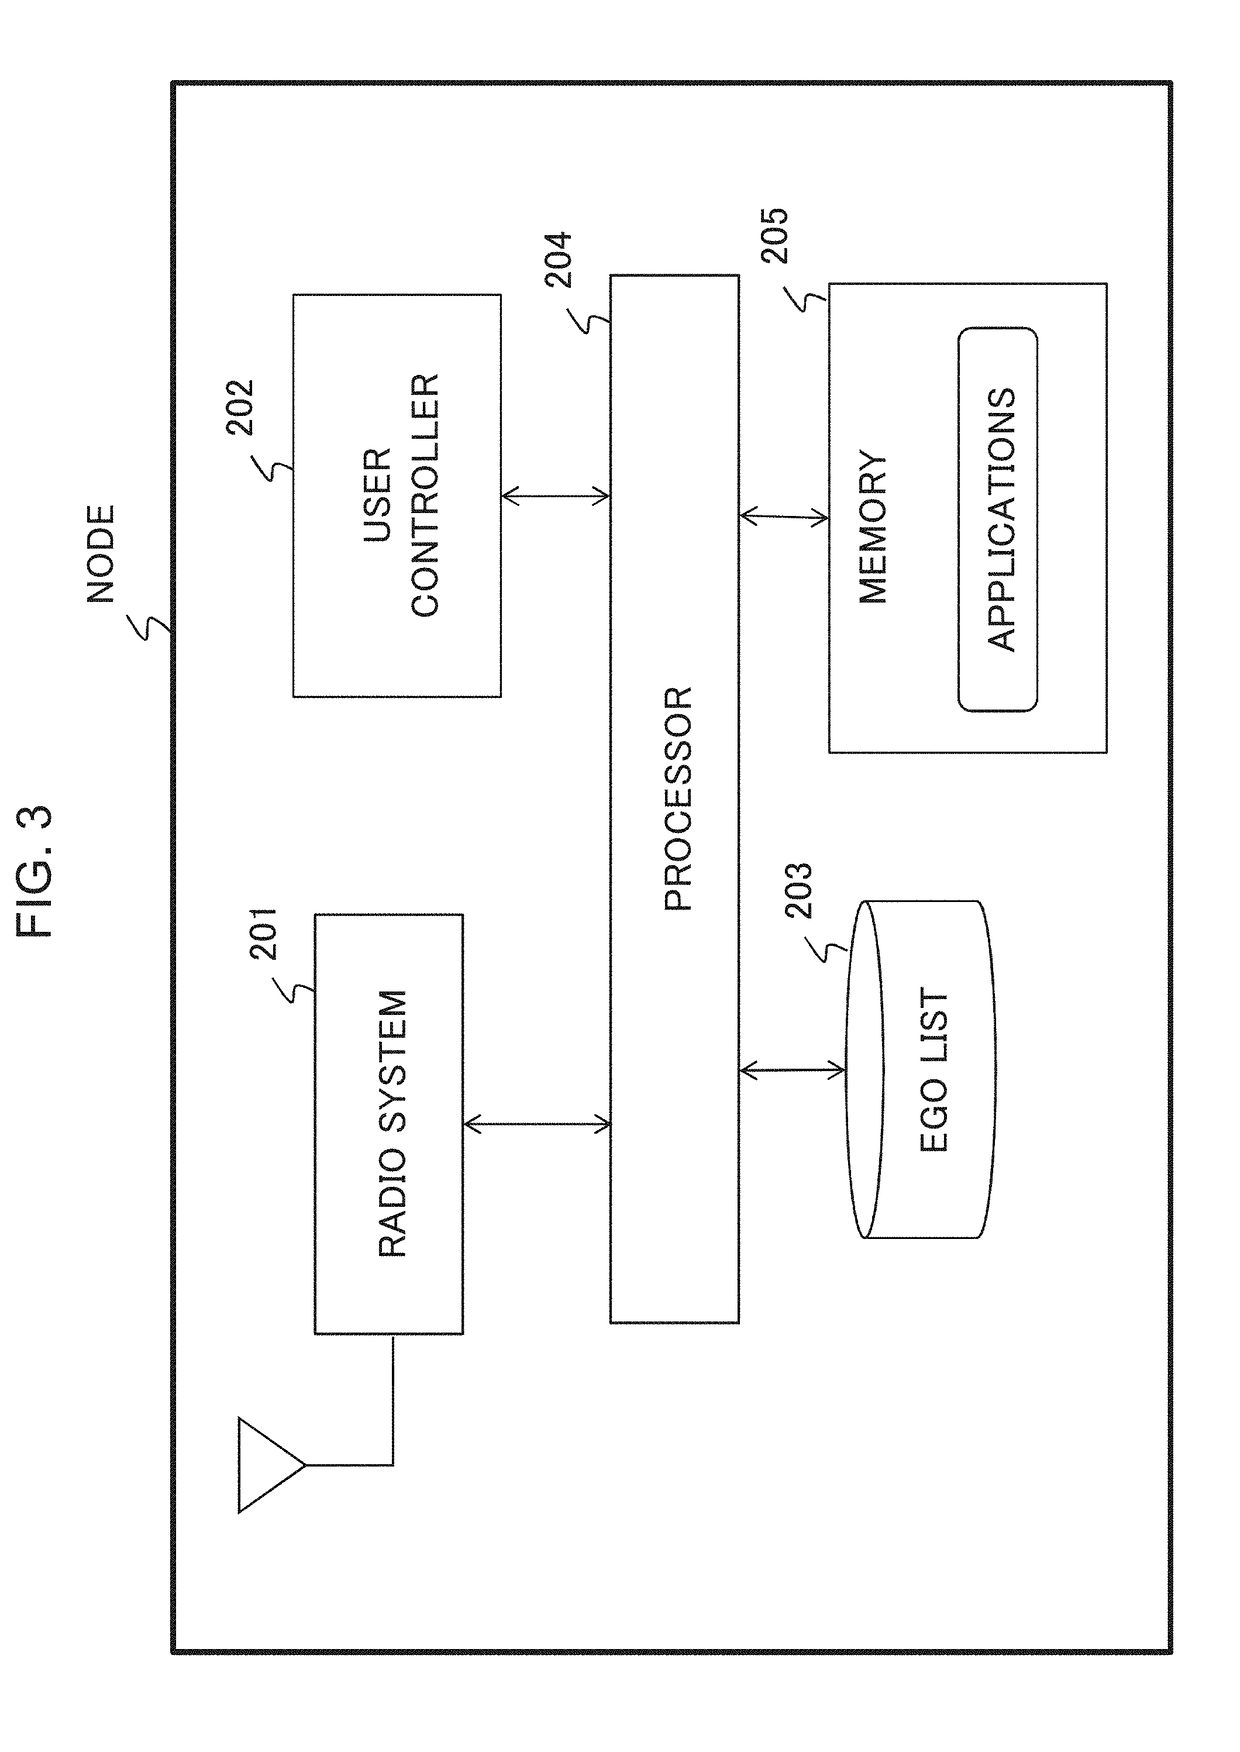 Mechanism for quick connection in wireless peer to peer networks